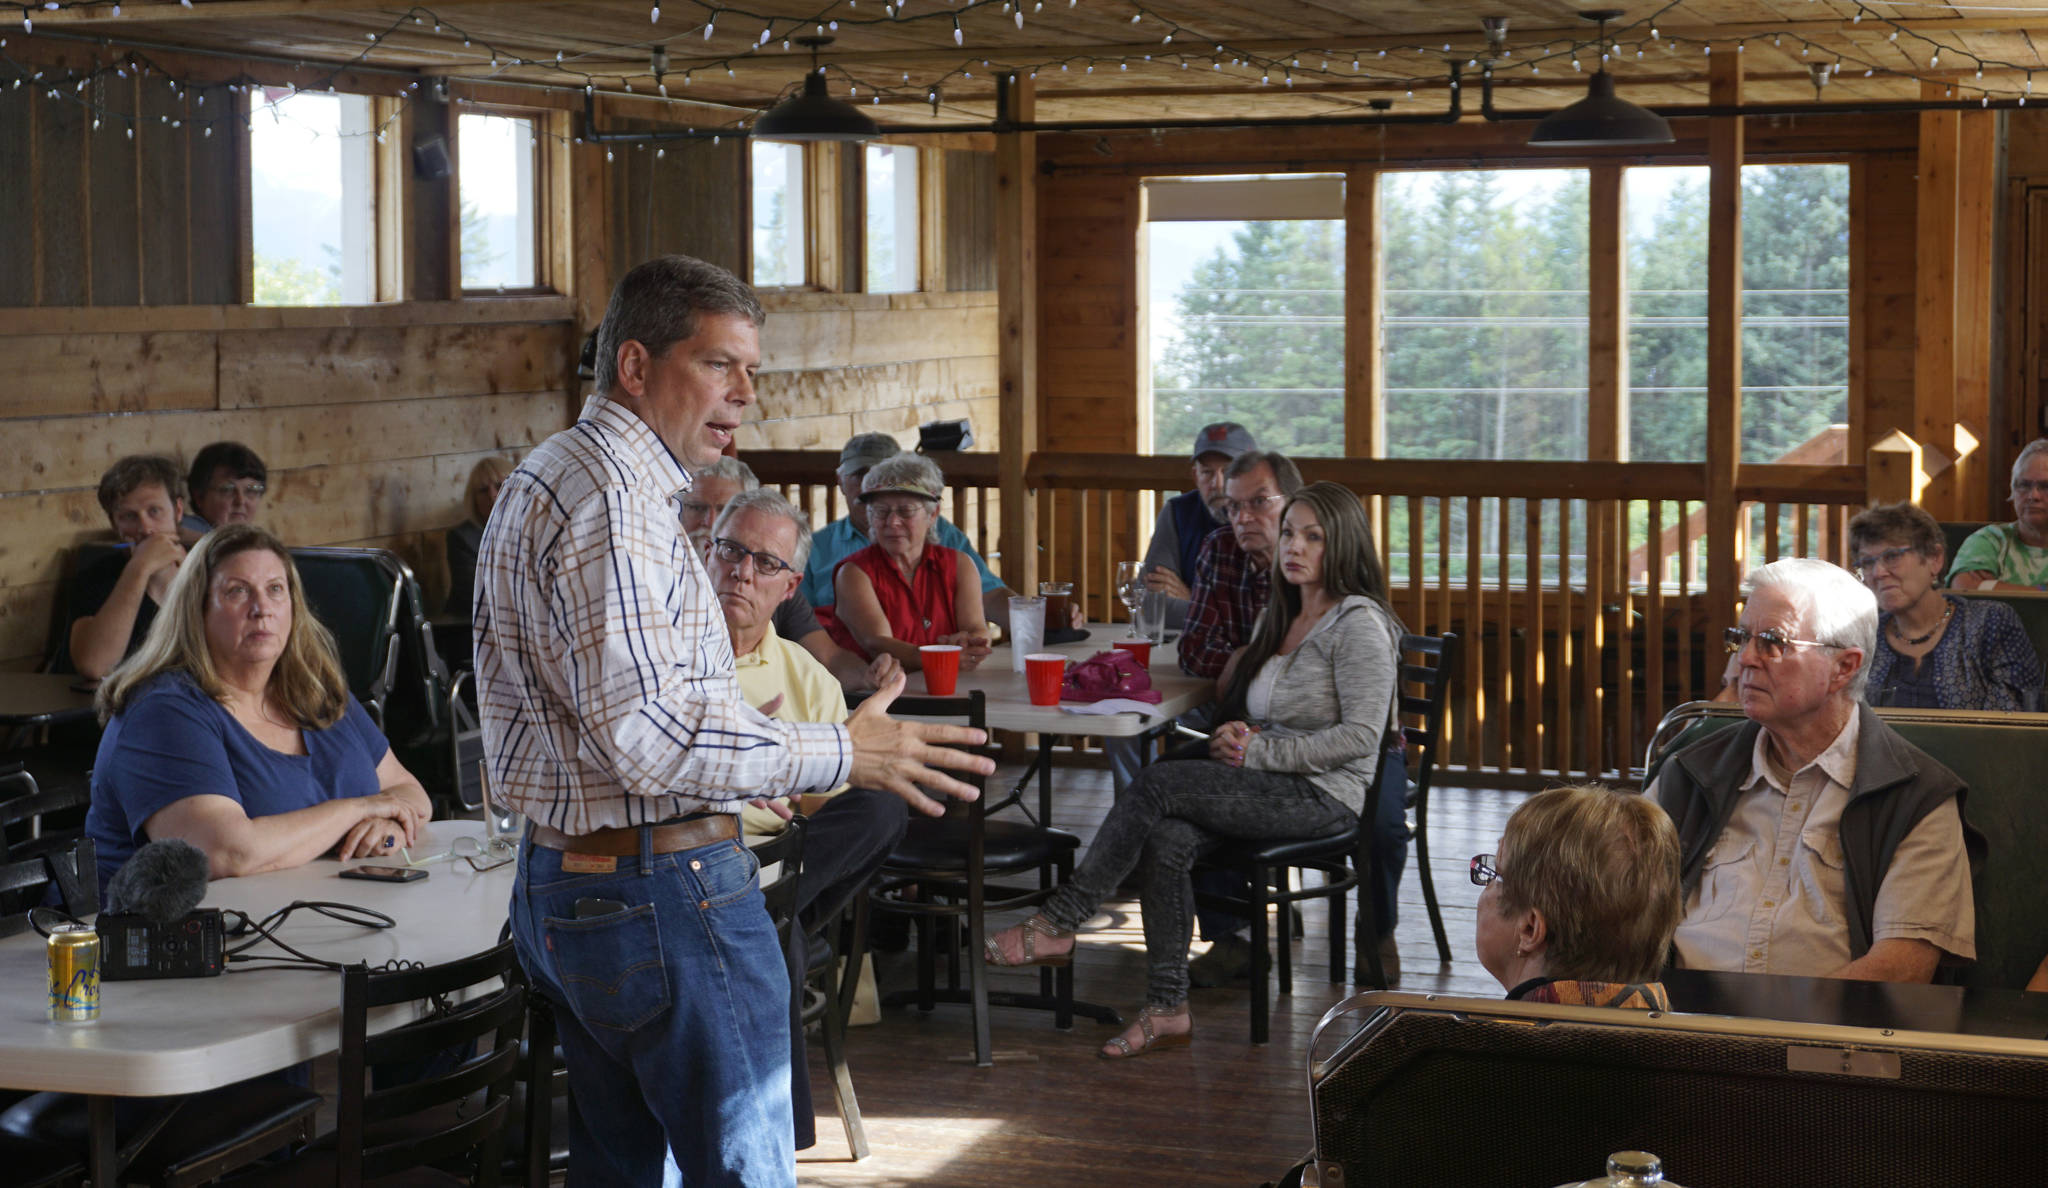 Mark Begich speaks to about 30 people last Thursday, July 26, 2018, at Alice’s Champagne Palace, Homer, Alaska. Begich, a former Anchorage mayor and U.S. Senator, is running for the Democratic Party nomination for governor. (Photo by Michael Armstrong/Homer News)